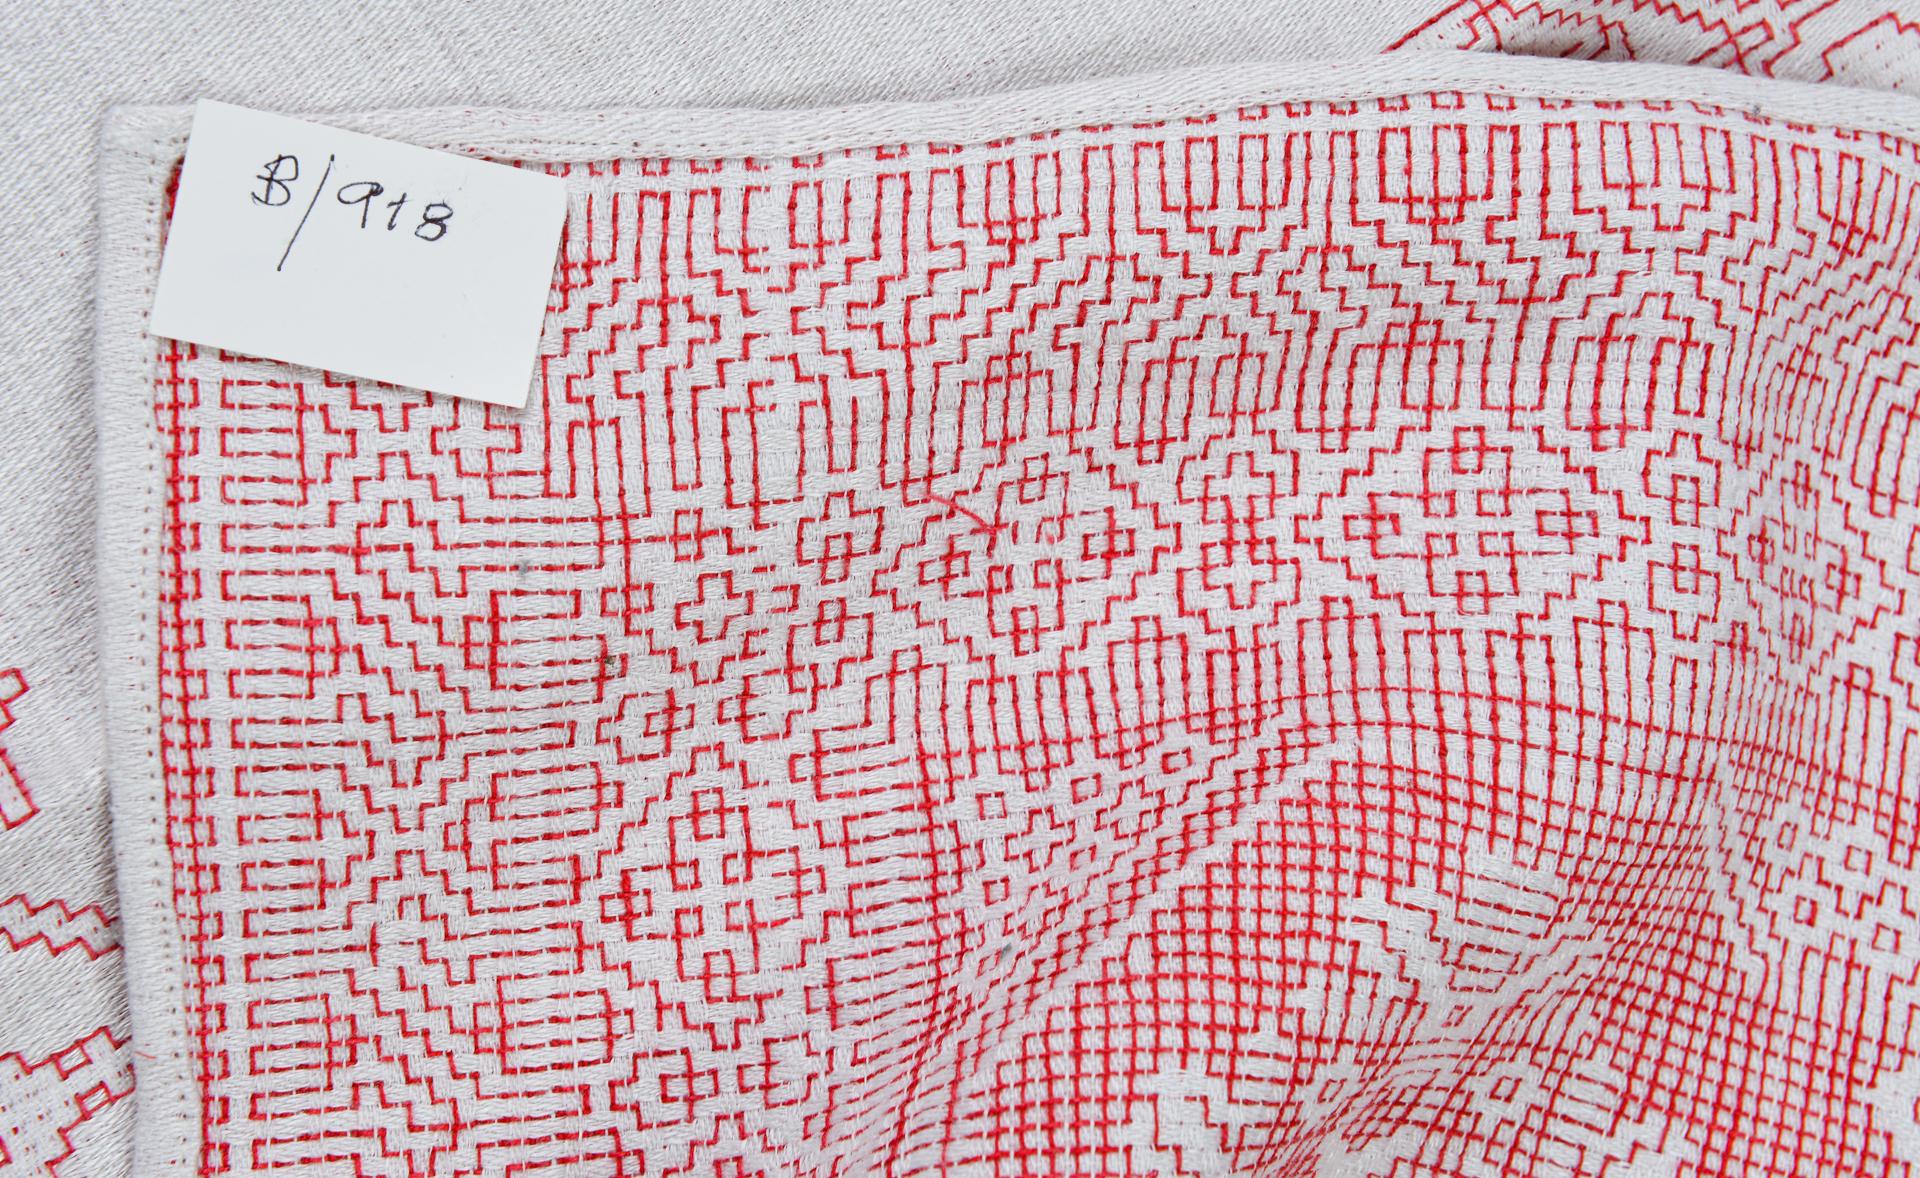 Nice square table cloth. It comes from a Dutch trousseau and is hall stitched with a nice simple red embroidery.
It also looks good placed diamond-shaped on a table.